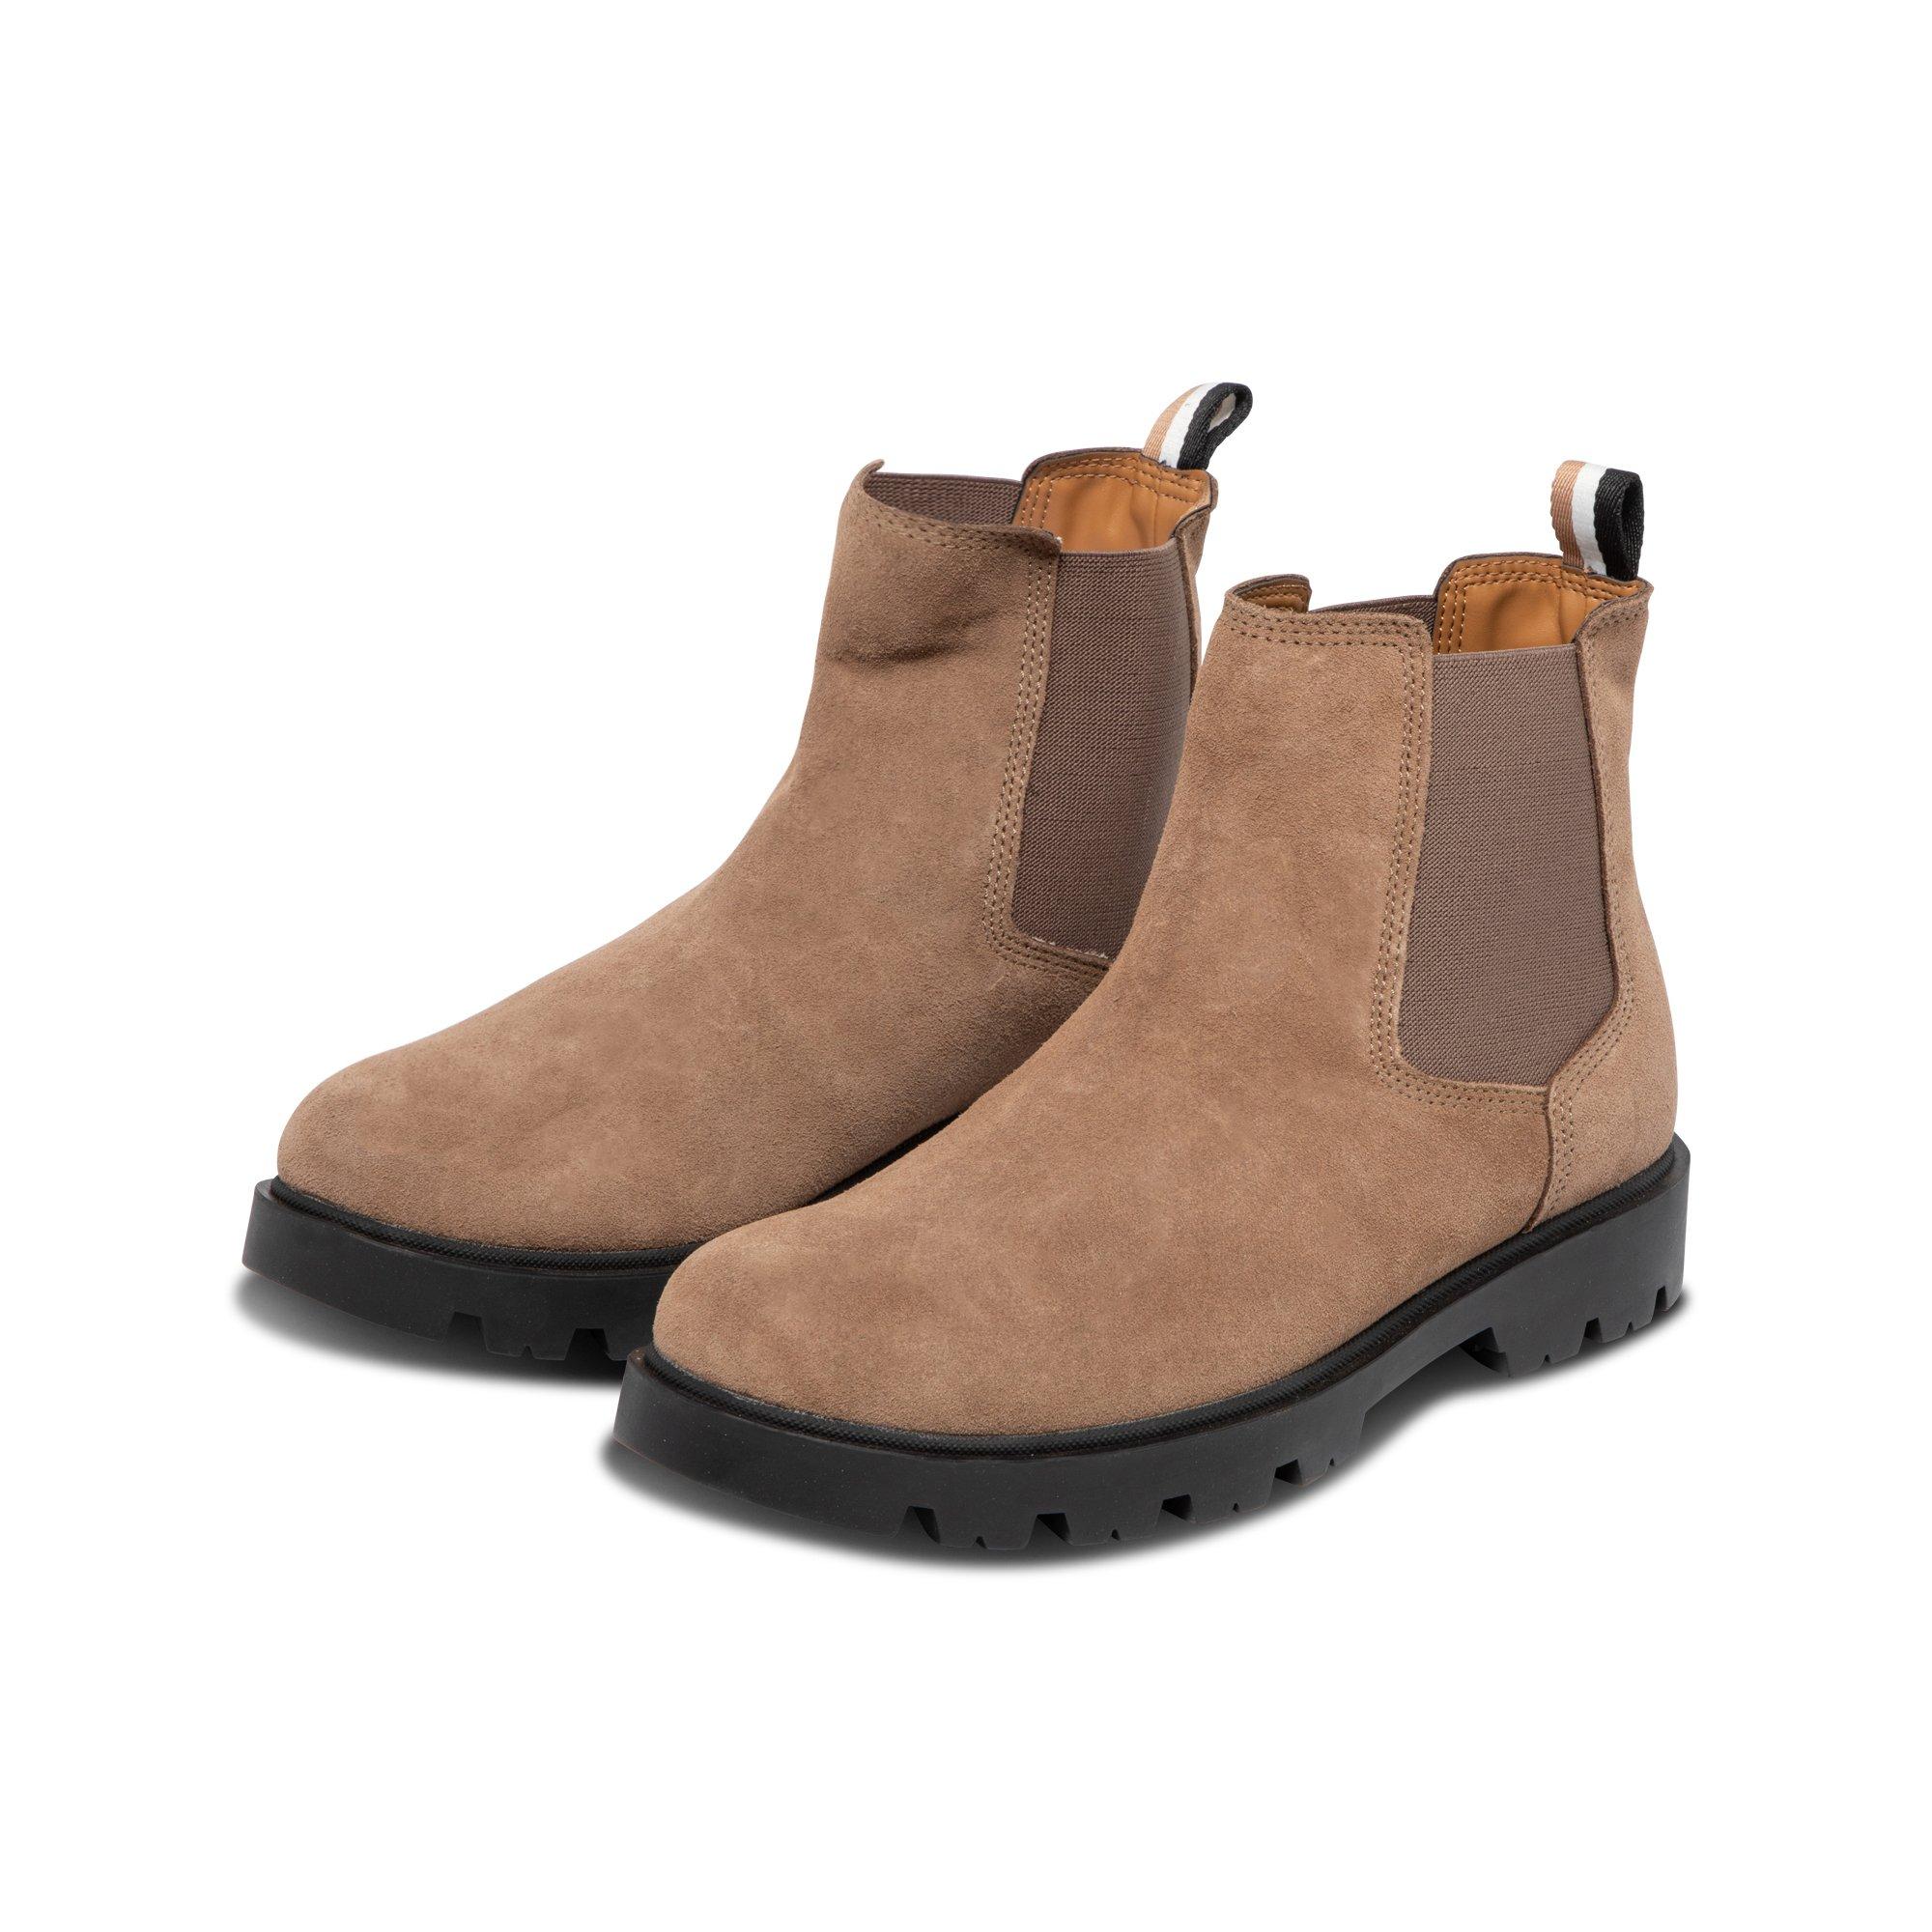 BOSS Adley Cheb Suede Chelsea-Stiefel 